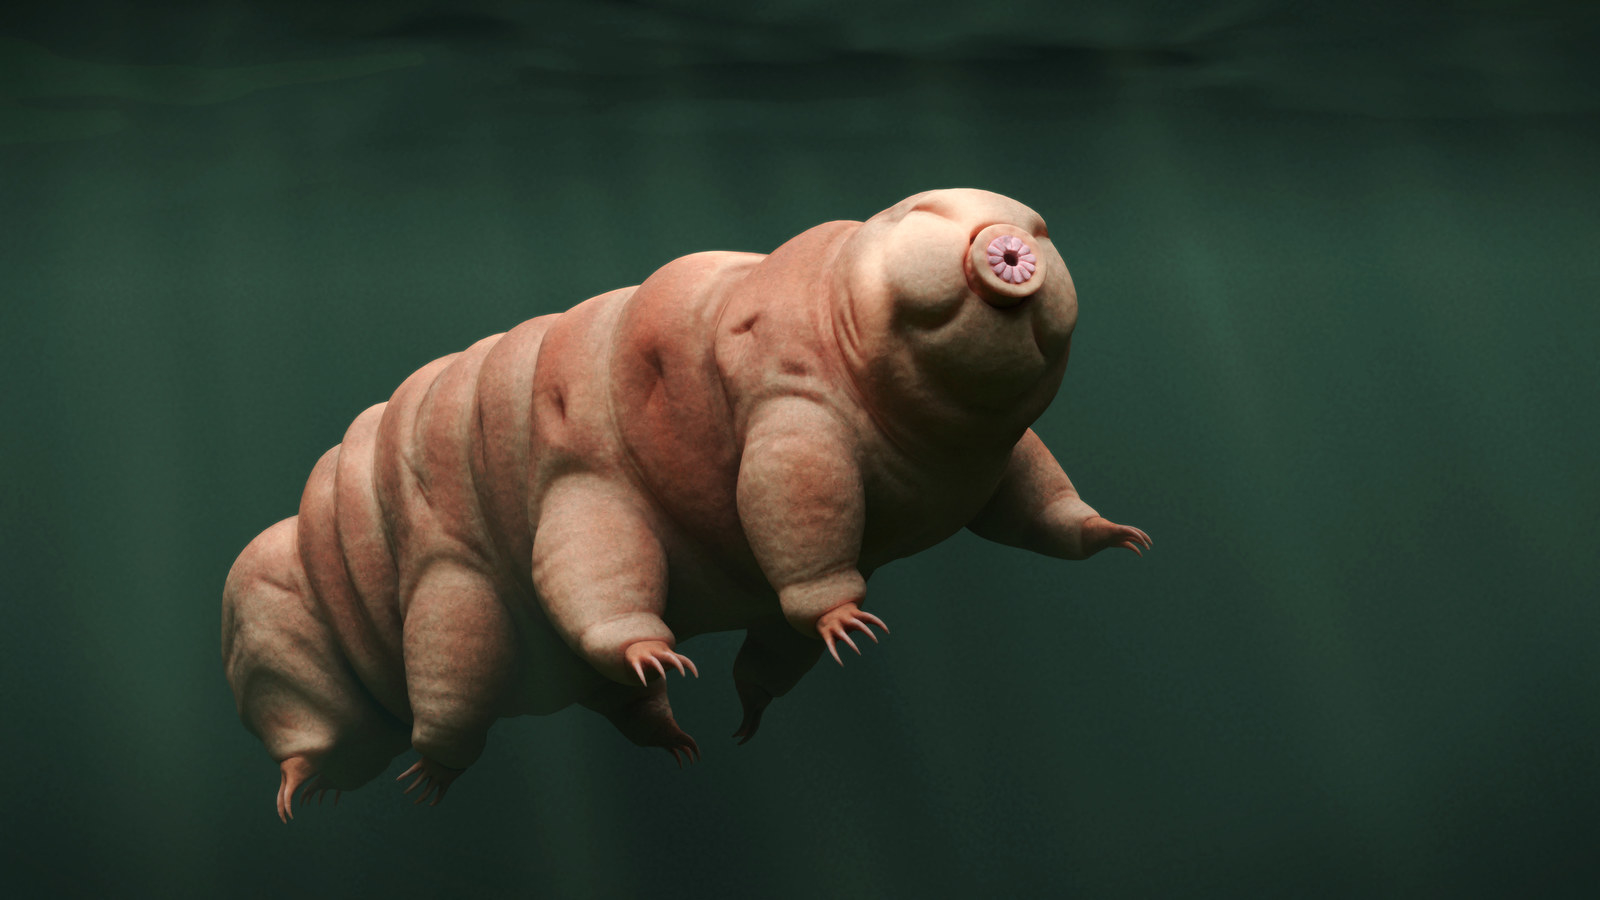 Naked Mole Rats do not fade away - Walking to the light